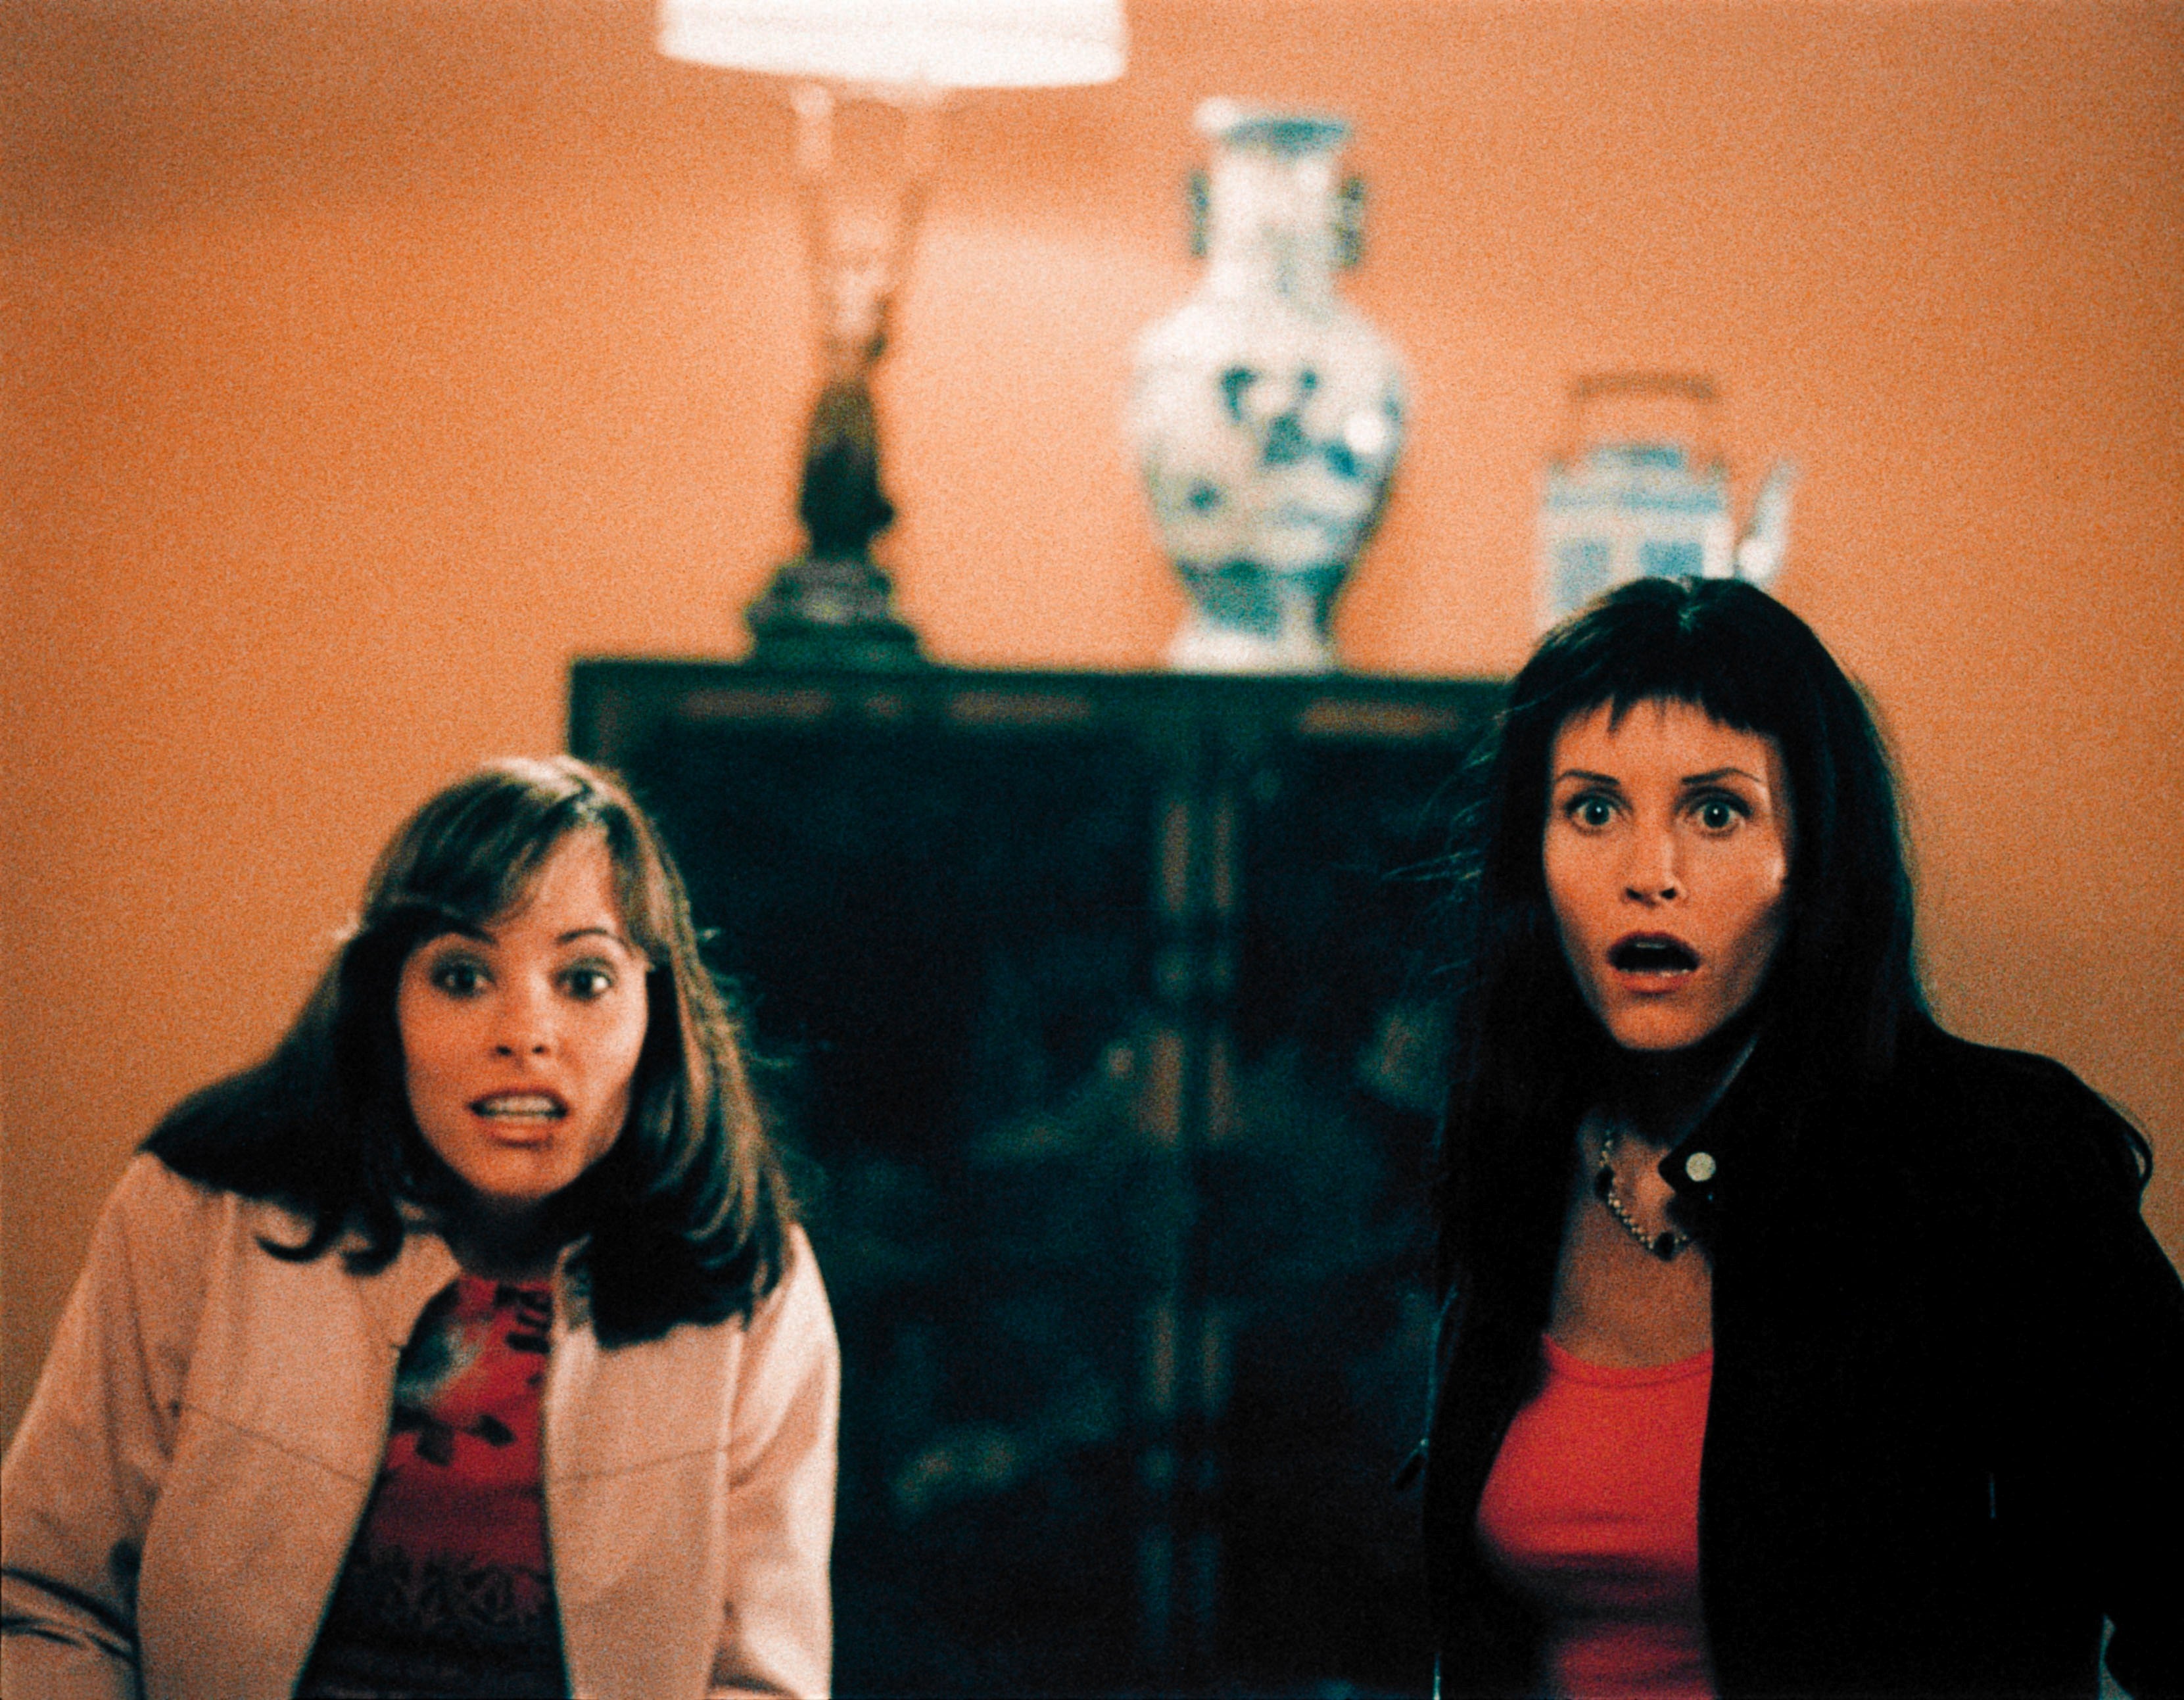 Parker Posey (left) and Cox in ‘Scream 3'